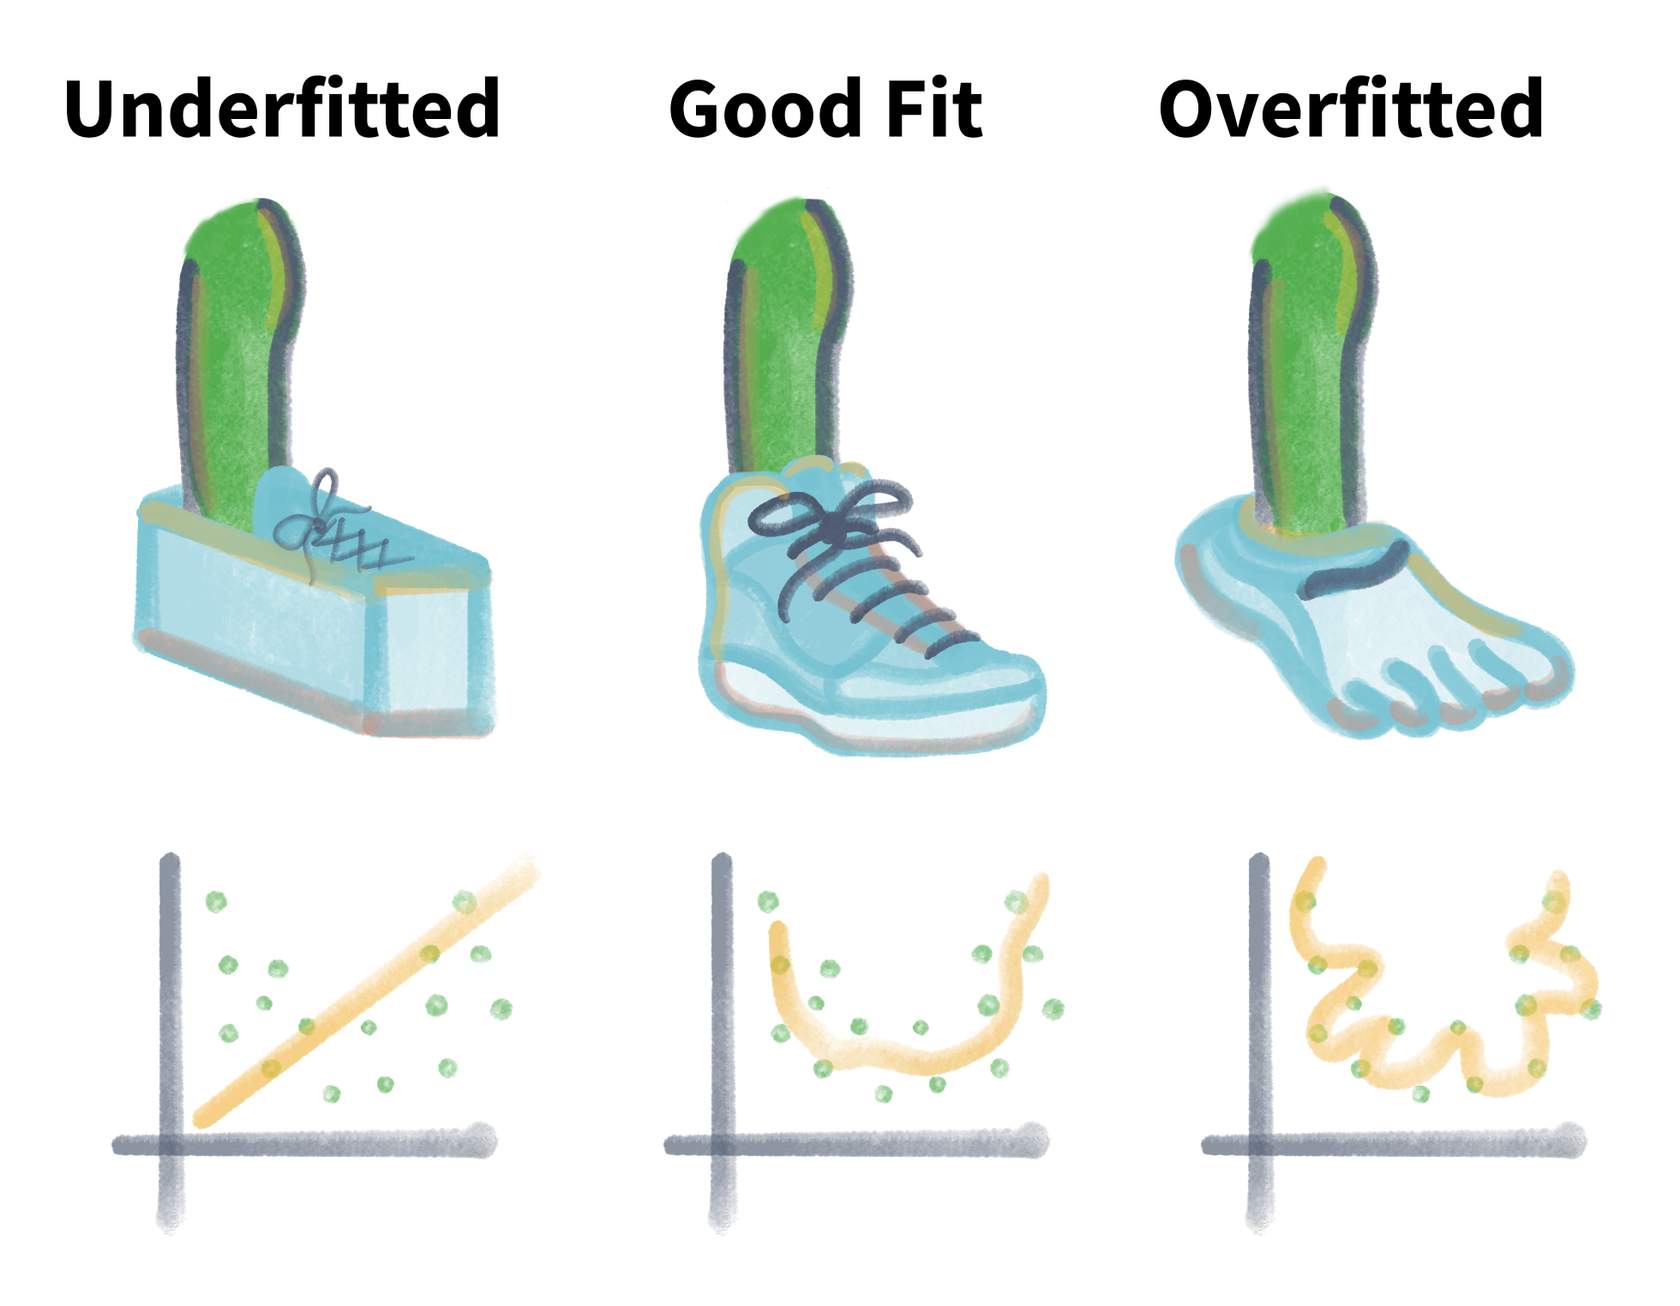 An illustration comparing ​underfitting​ and overfitting​ to a good fit. A good fit is a well fit gym shoe with data that has a u shaped distribution. Underfitting is a block shoe with data with a positive correlation. Overfitting is a sock shoe with data that has no good fit.